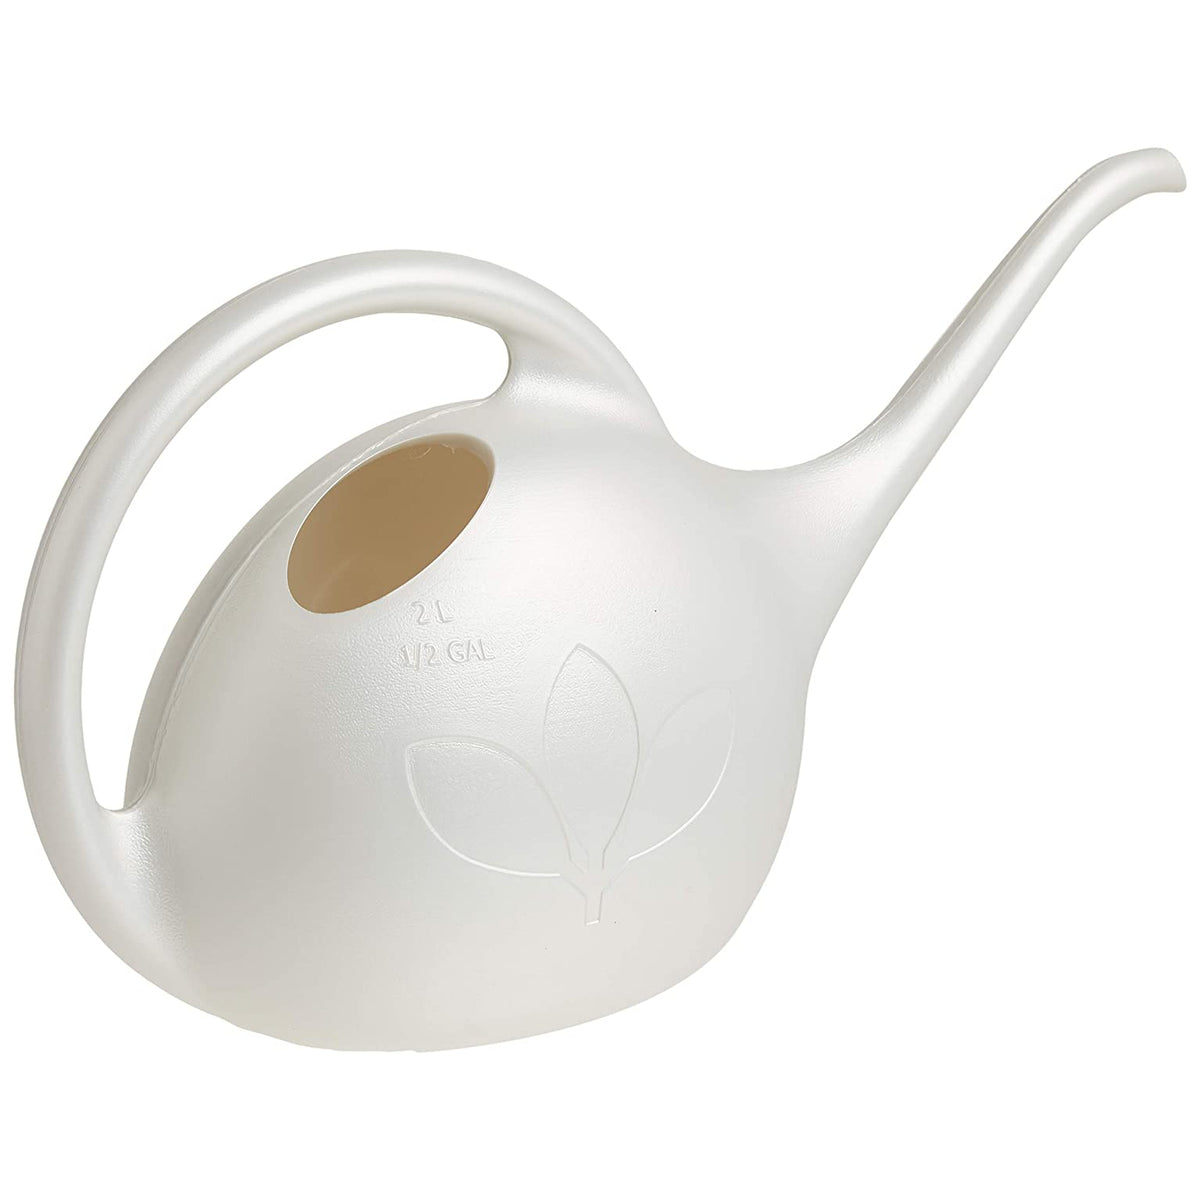 Novelty 30602 Plastic Watering Can, 1/2 Gallon, Pearlescent White